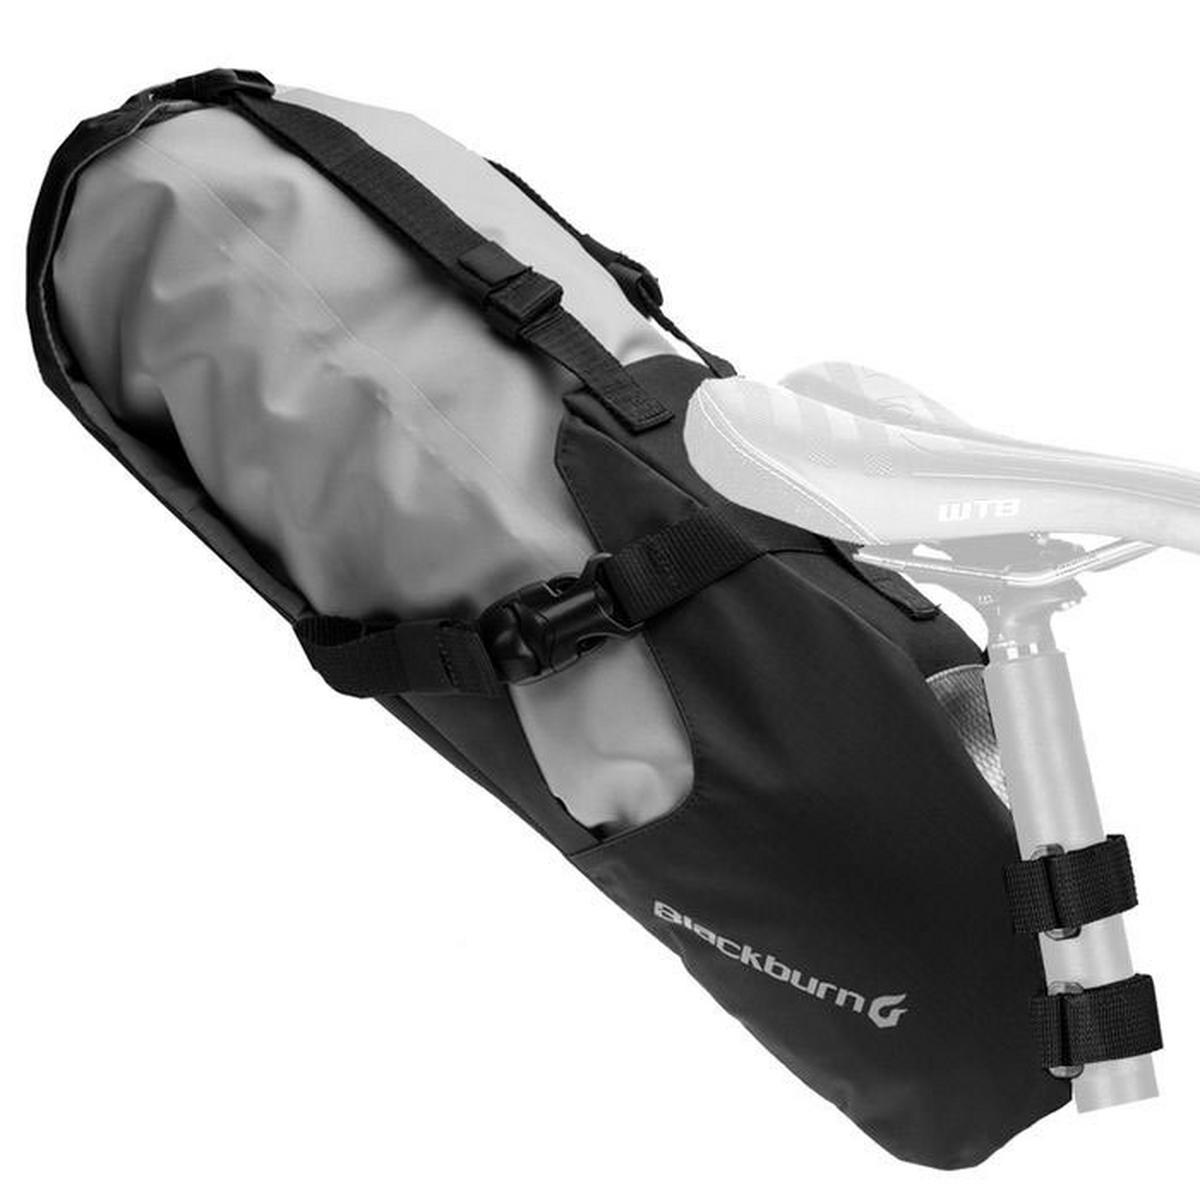 Outpost Seat Pack + Dry Bag